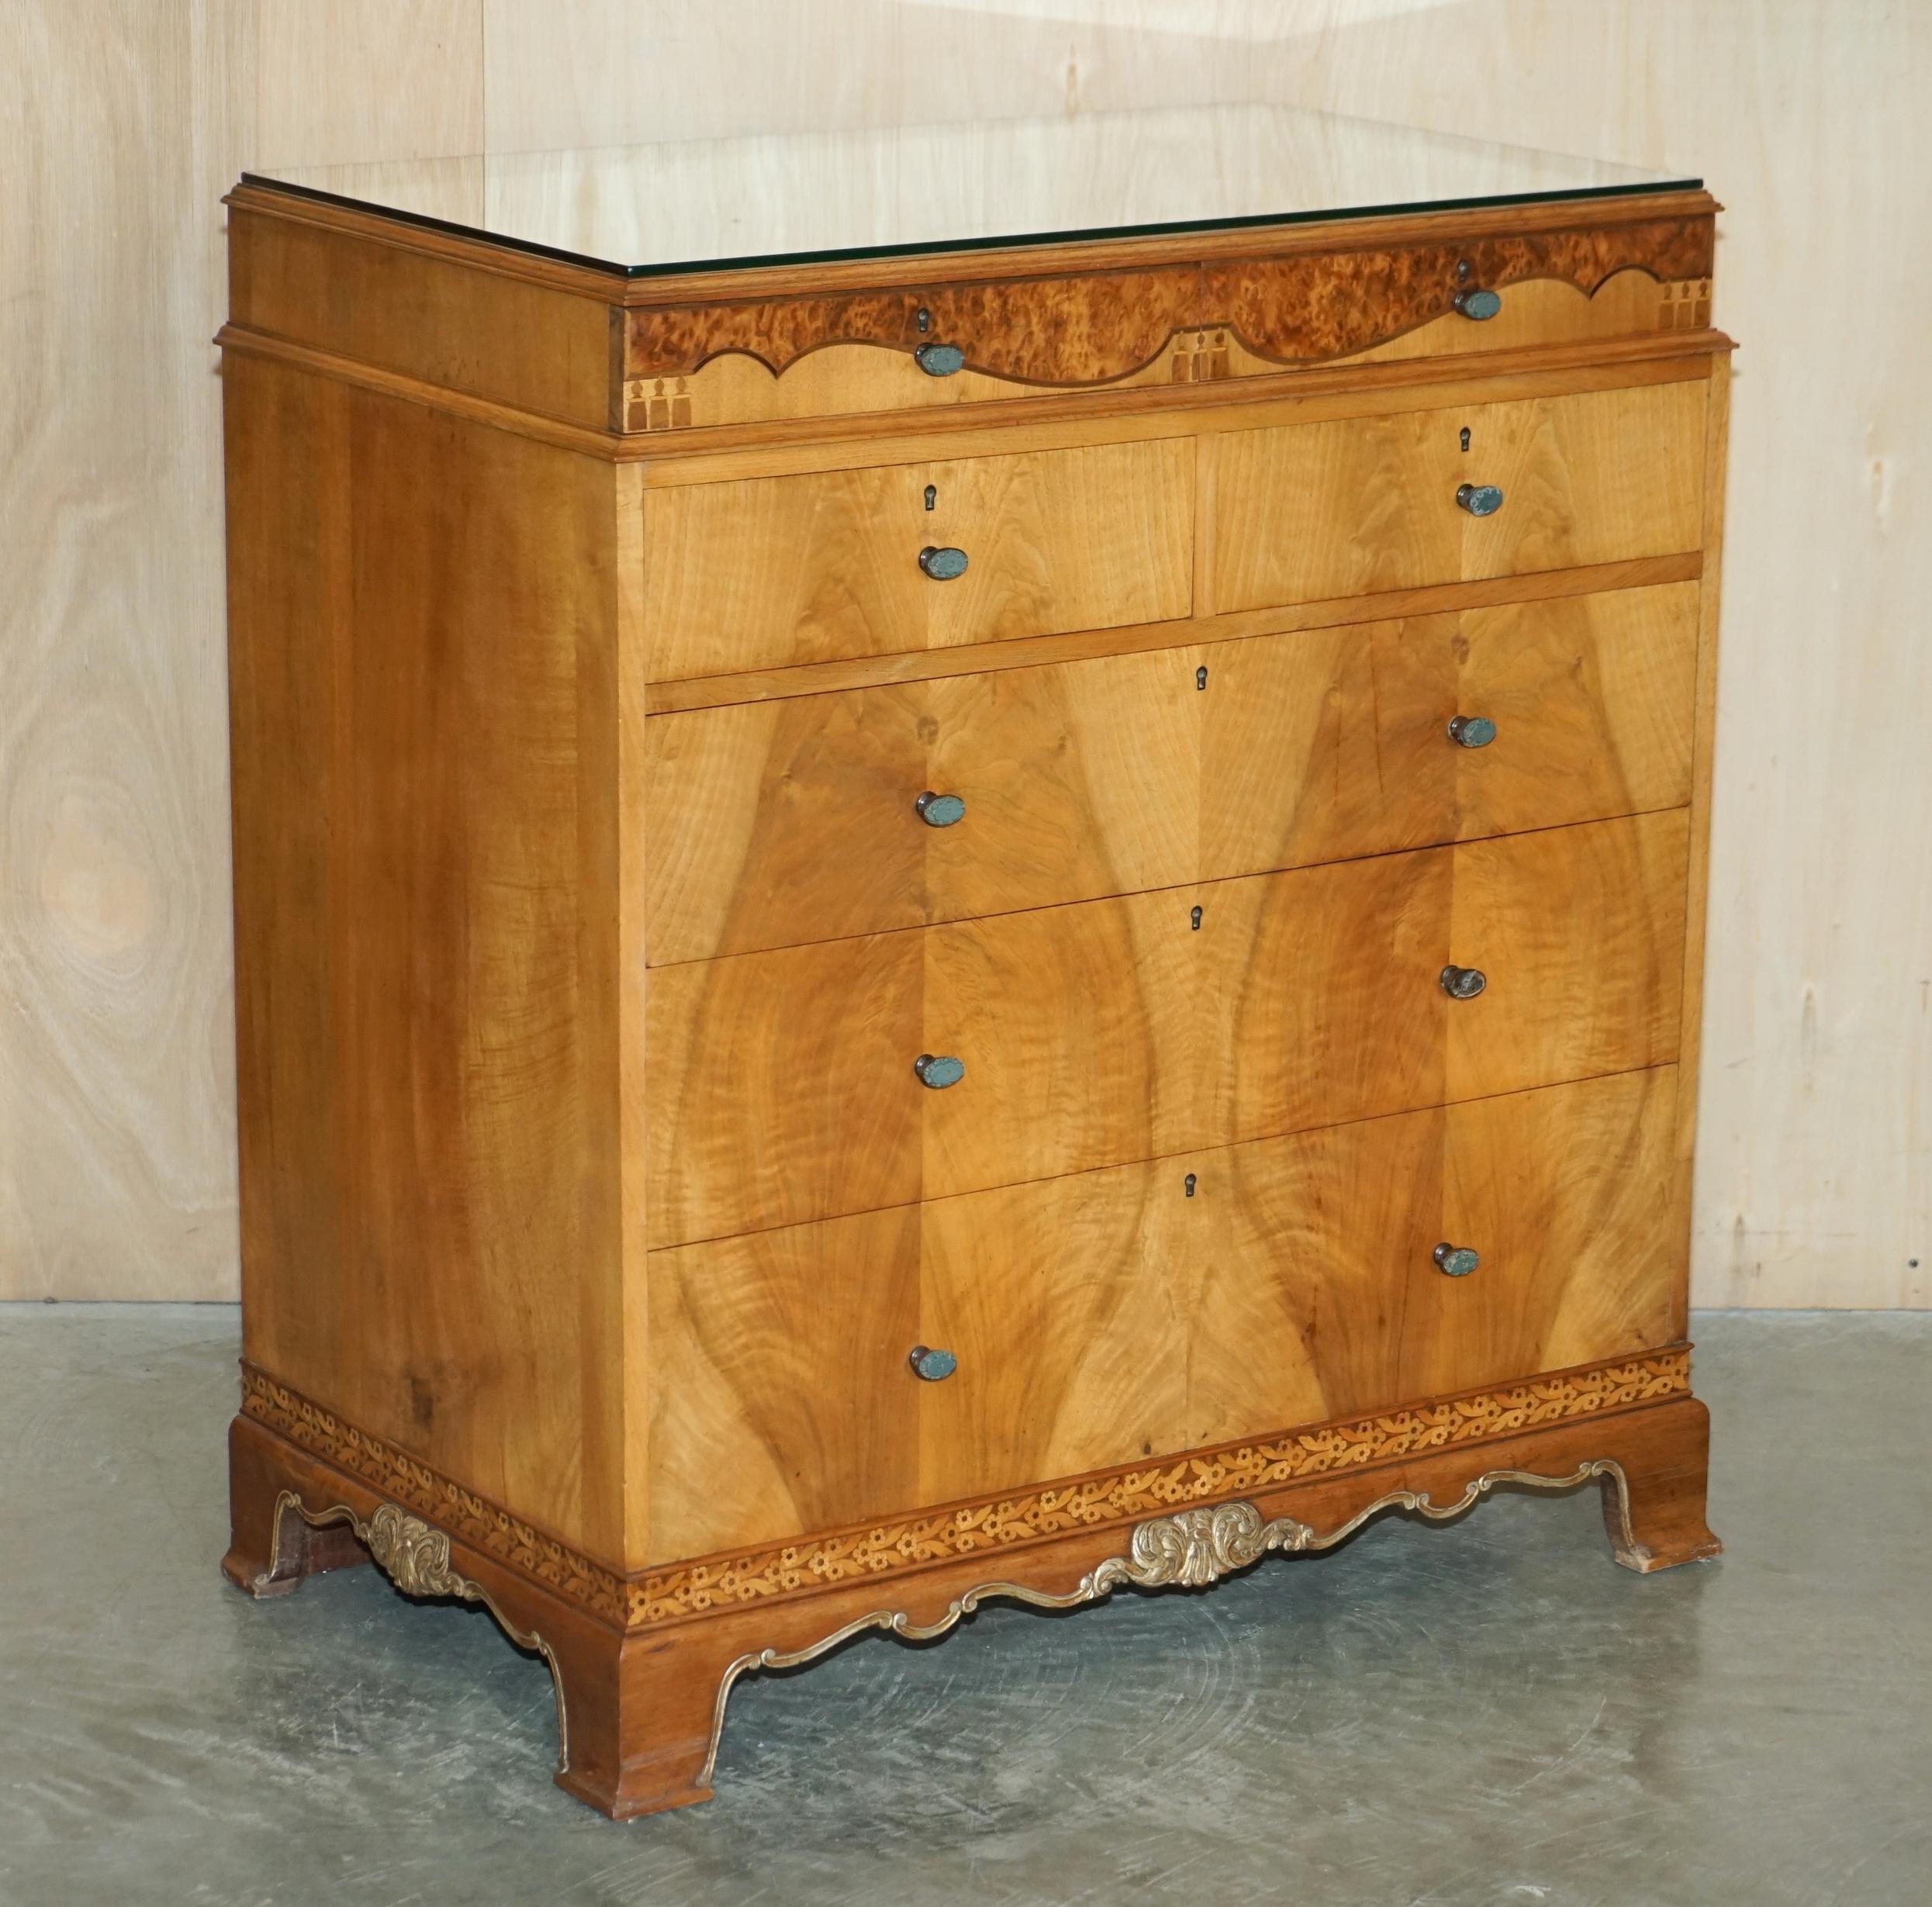 We are delighted to offer for sale this finest quality Waring & Gillow Lancaster, Burr Walnut inlaid large chest of drawers which is part of a large suite

This piece is part of a bedroom set, I have in total a triple bank wardrobe, dressing table